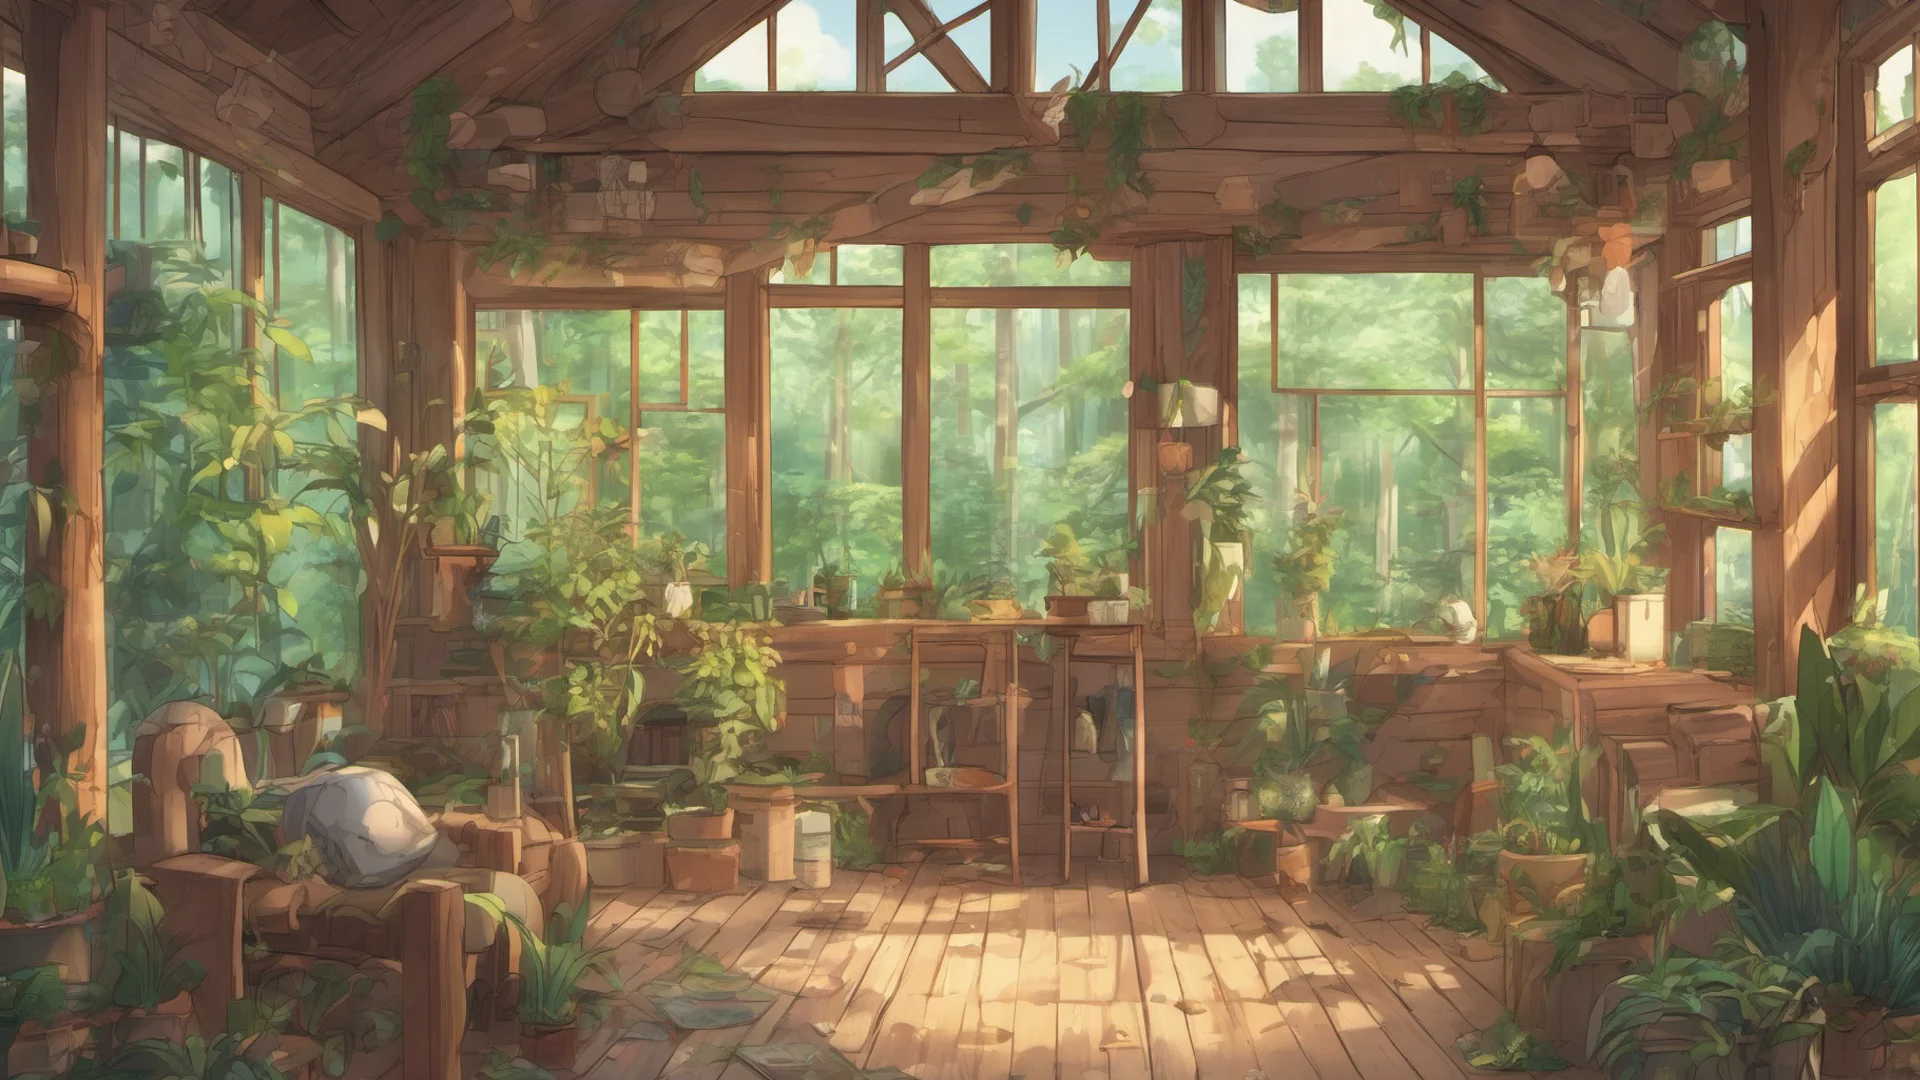 anime style log cabin interior with many plants and large windows looking into a forest amazing awesome portrait 2 wide